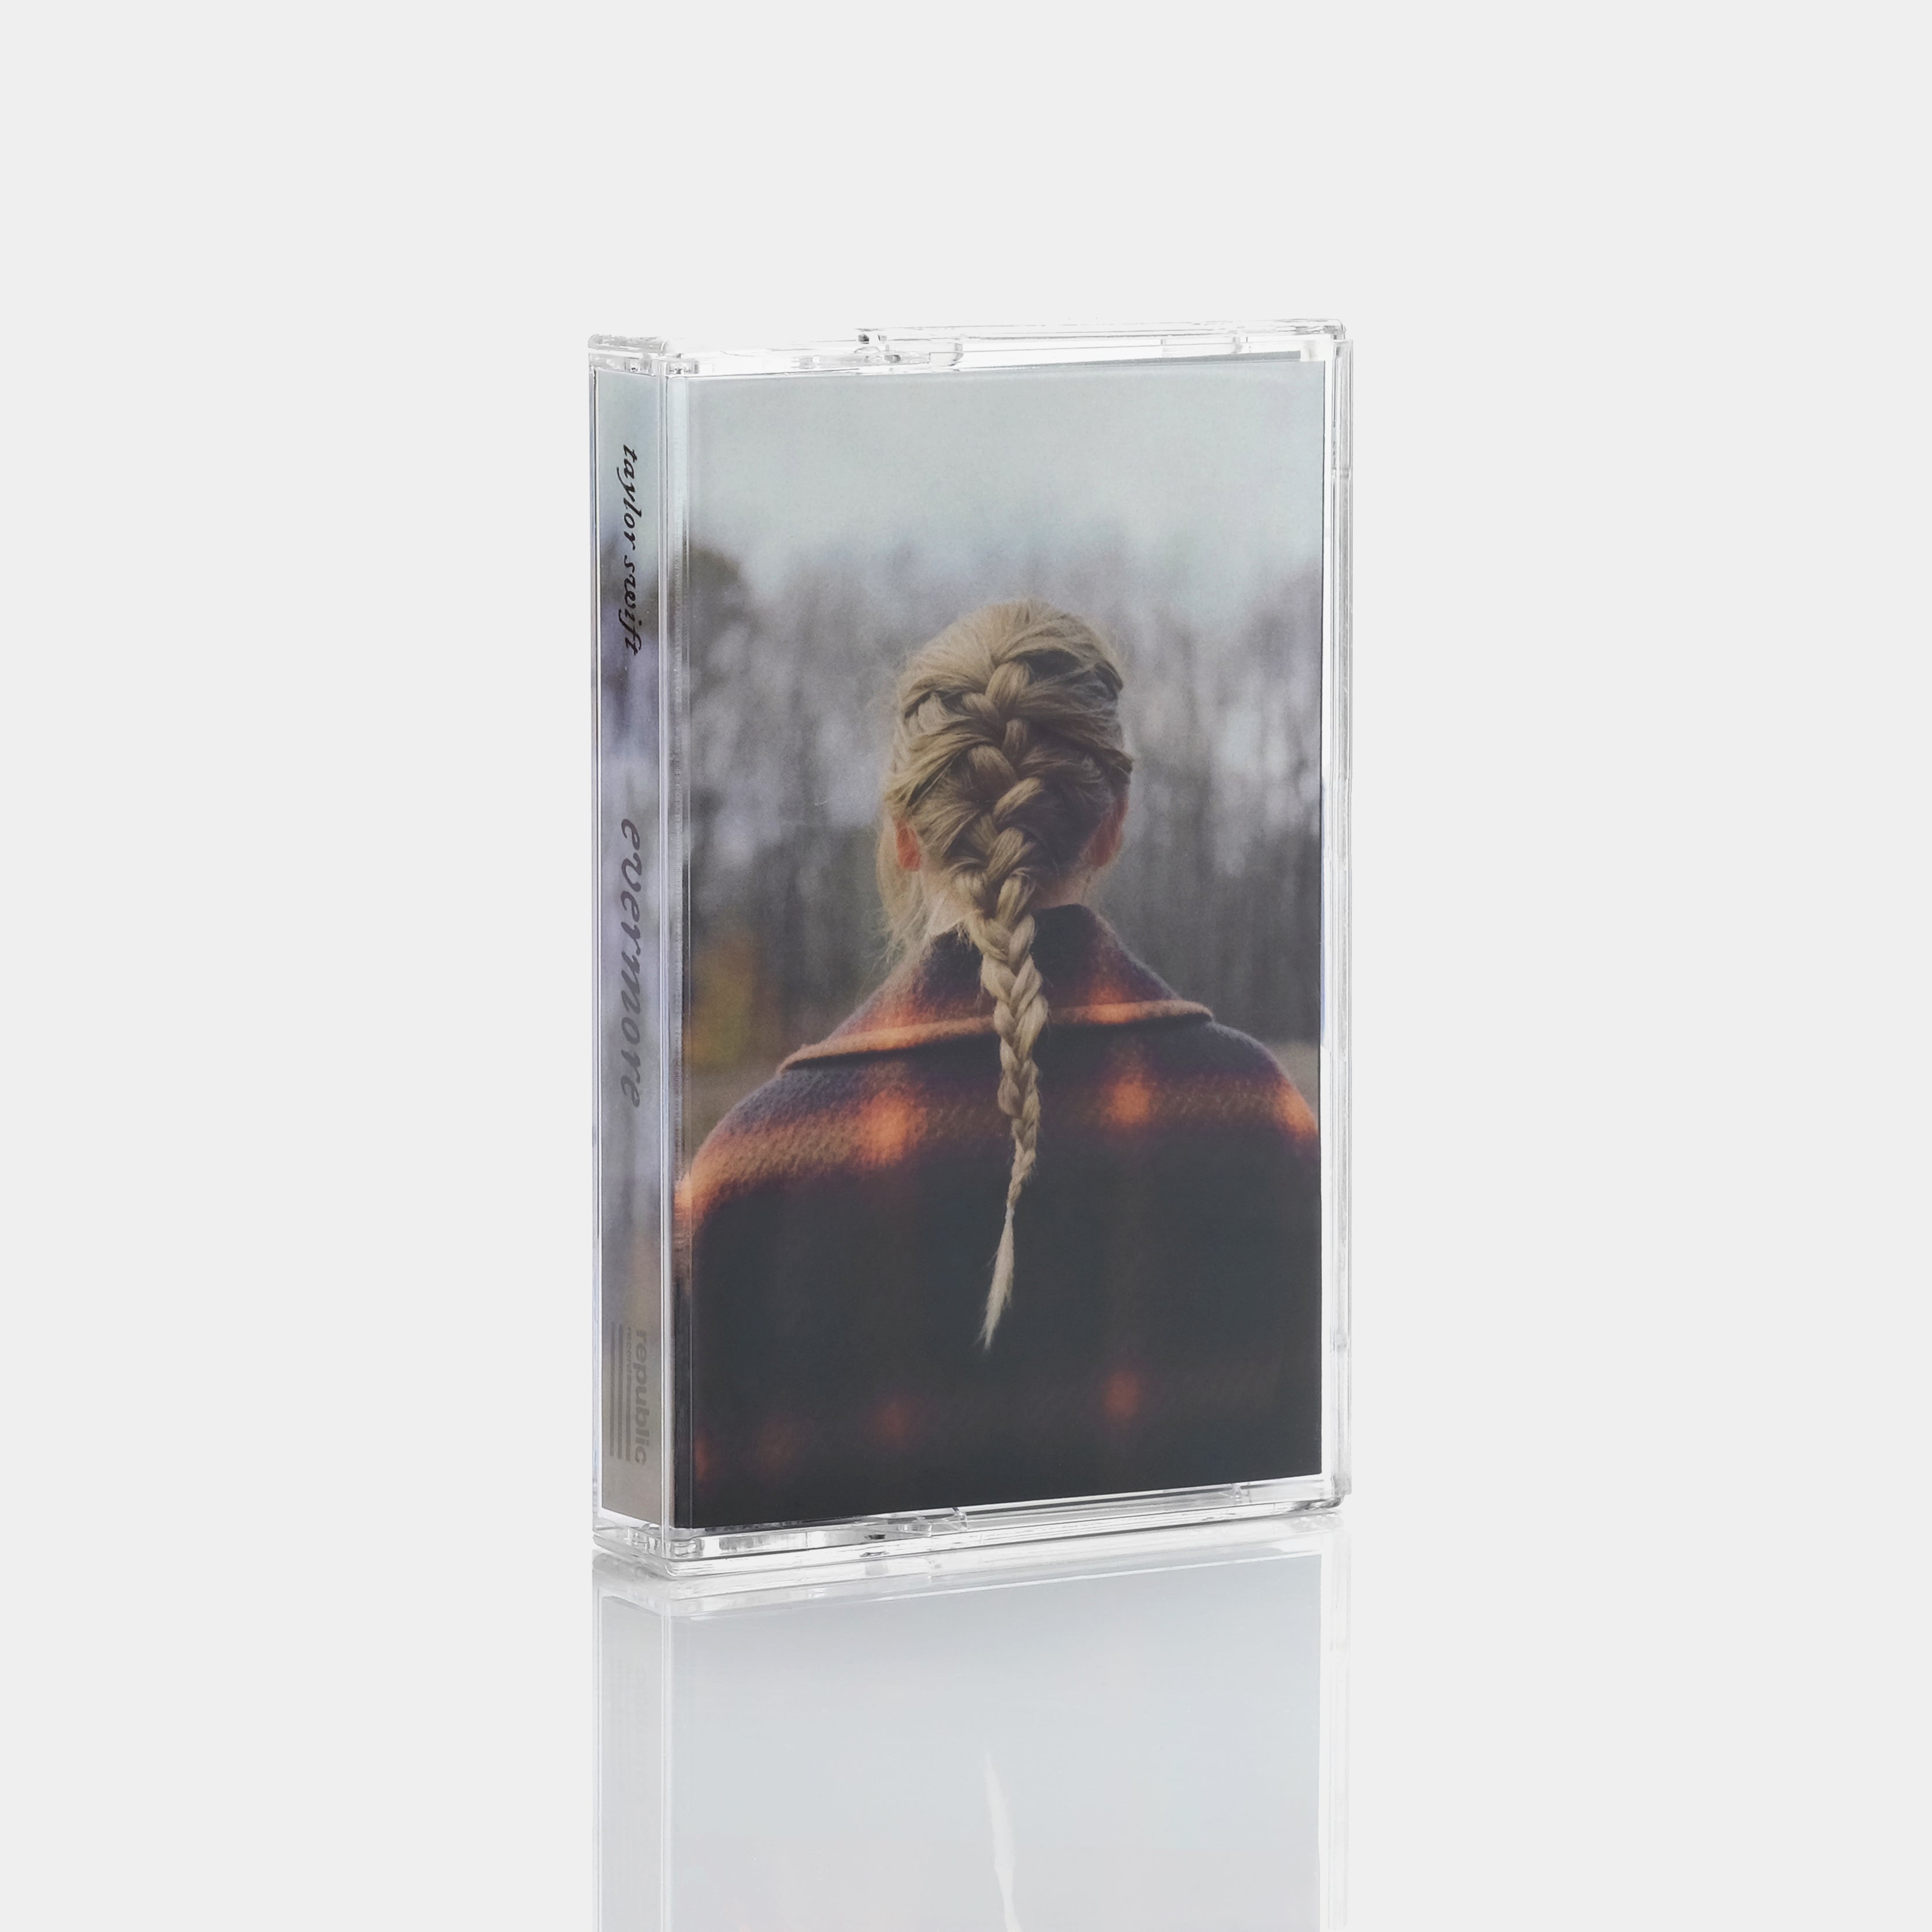 Taylor Swift - Evermore (Deluxe Edition) Cassette Tape